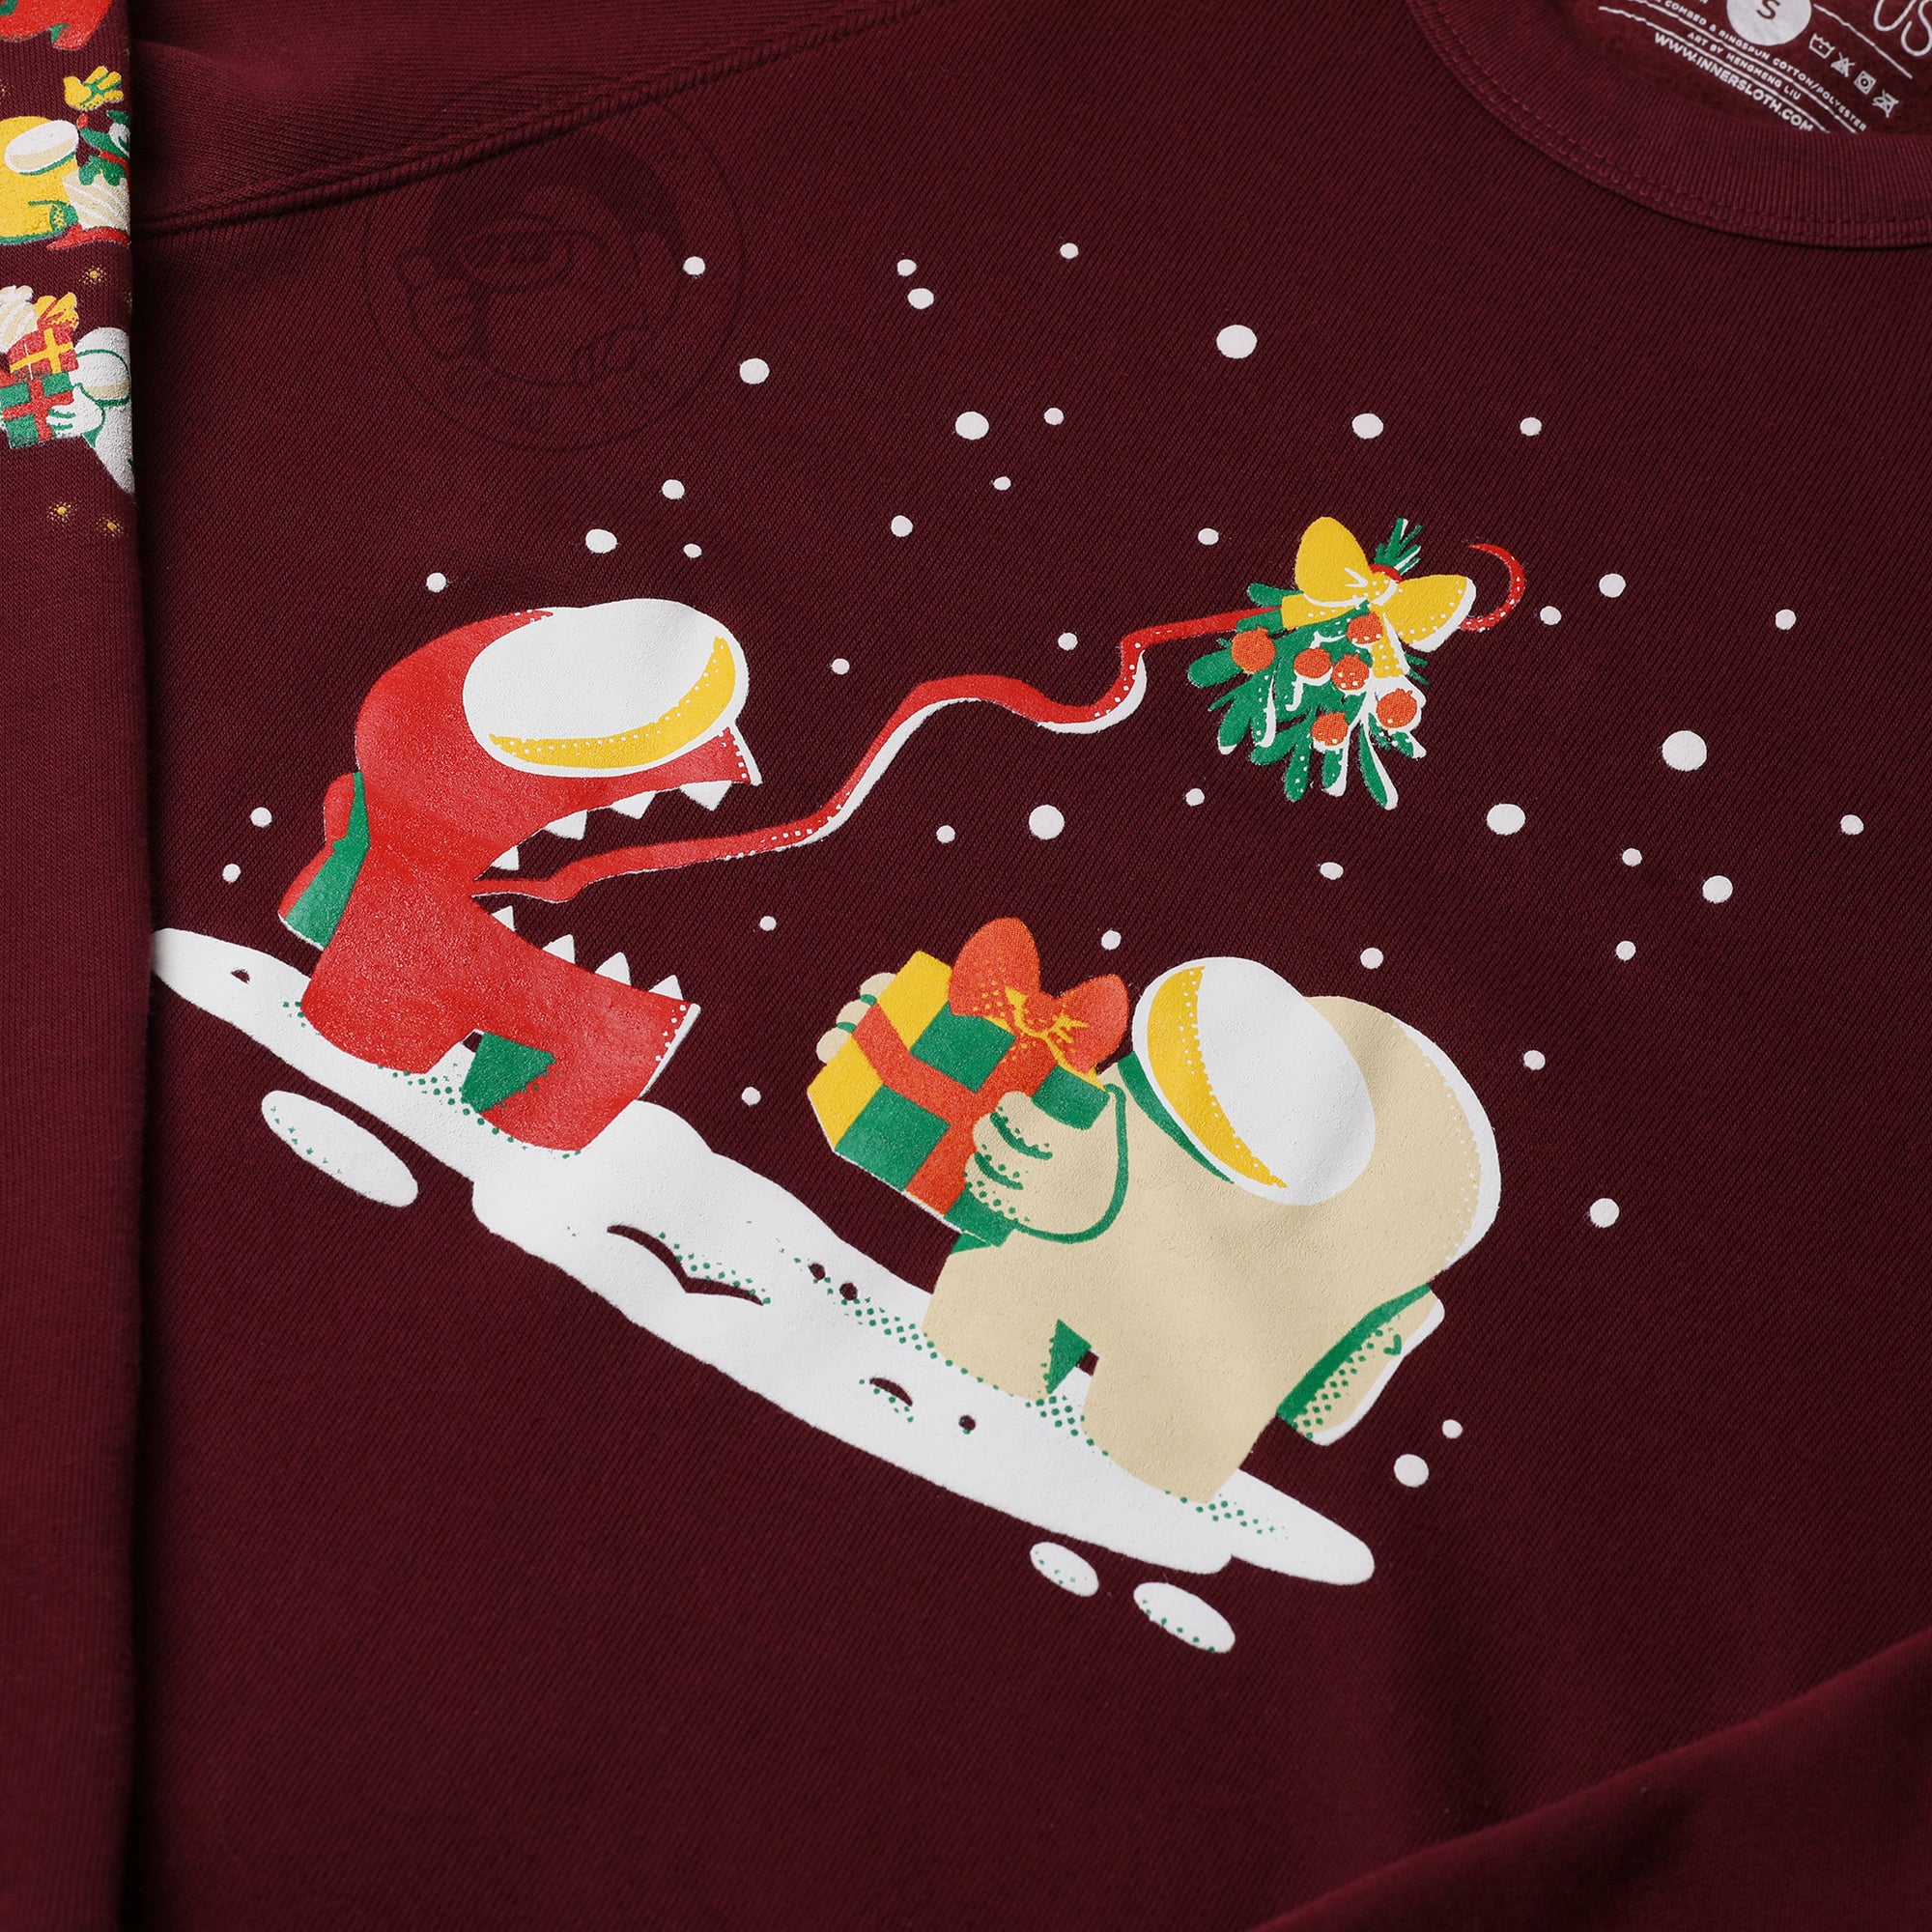 A flat lay photograph of a maroon longsleeve sweatshirt on a white background. The front of the garment features an illustration of an Impostor and Crewmate under the Mistletoe and two mirrored holiday sleeve designs. Artwork designed by Mengmeng Liu